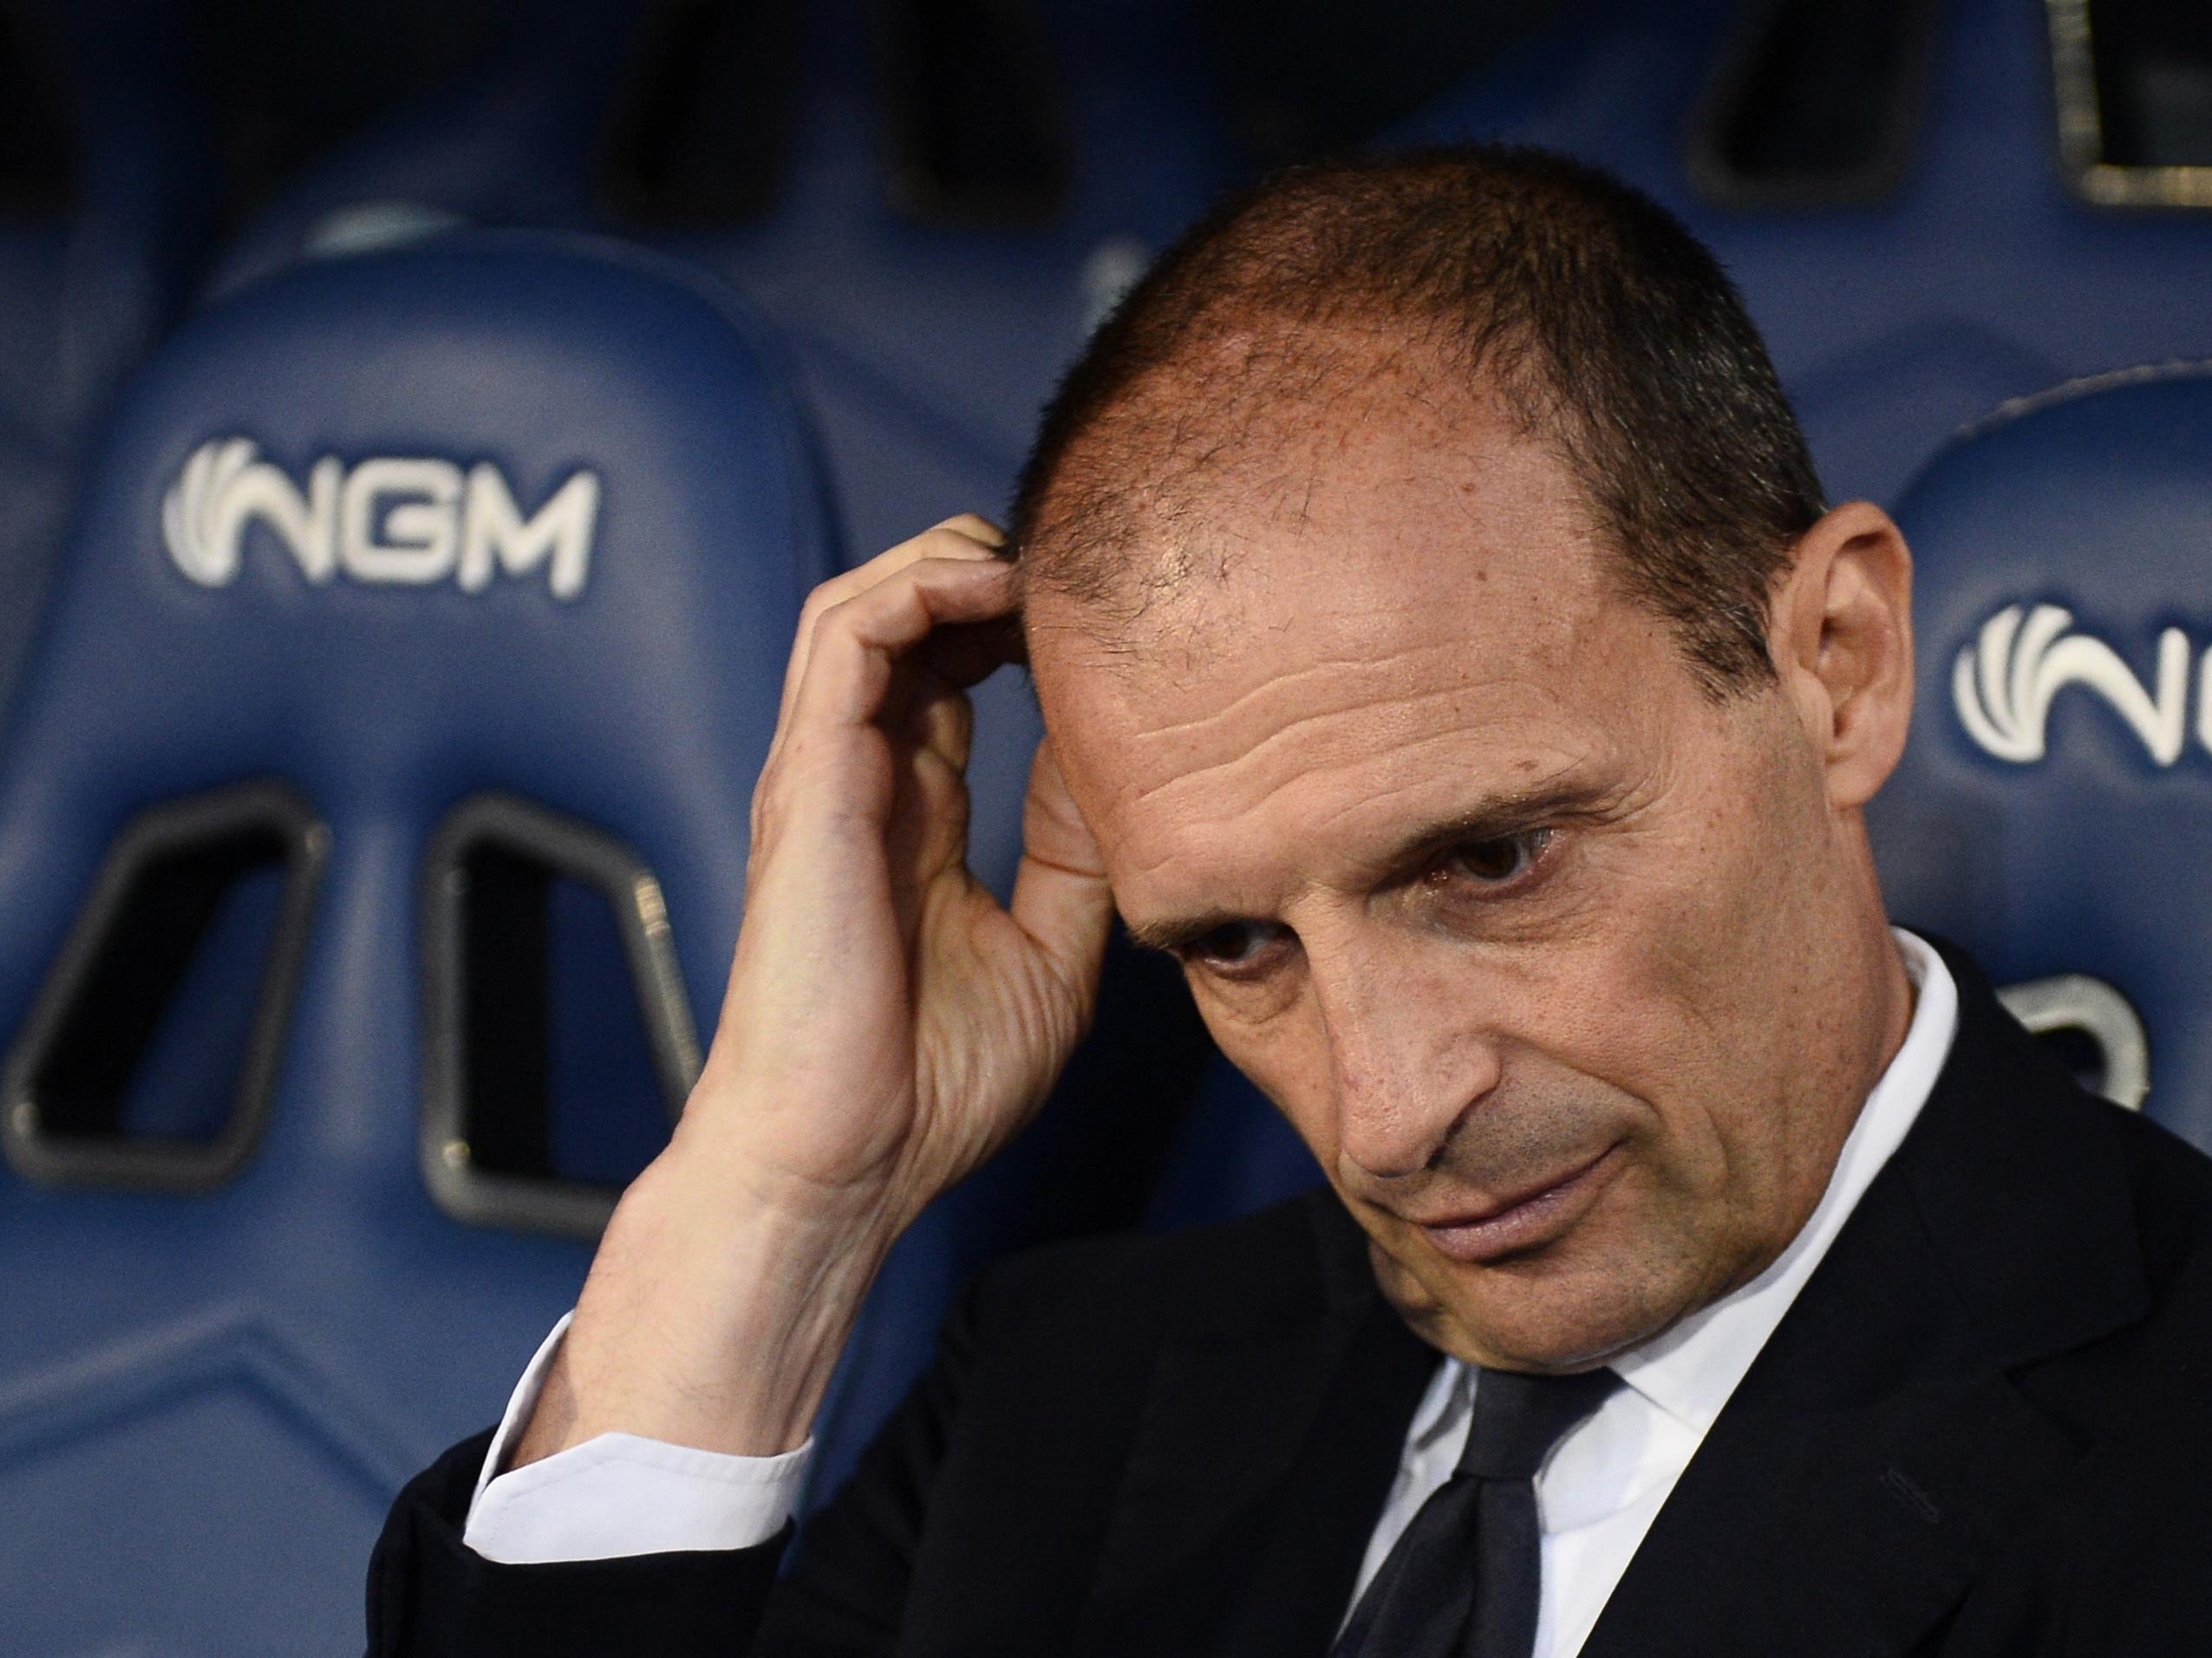 The future of Massimiliano Allegri has been subjected to intense speculations over the last couple of week, but nothing has been decided yet.